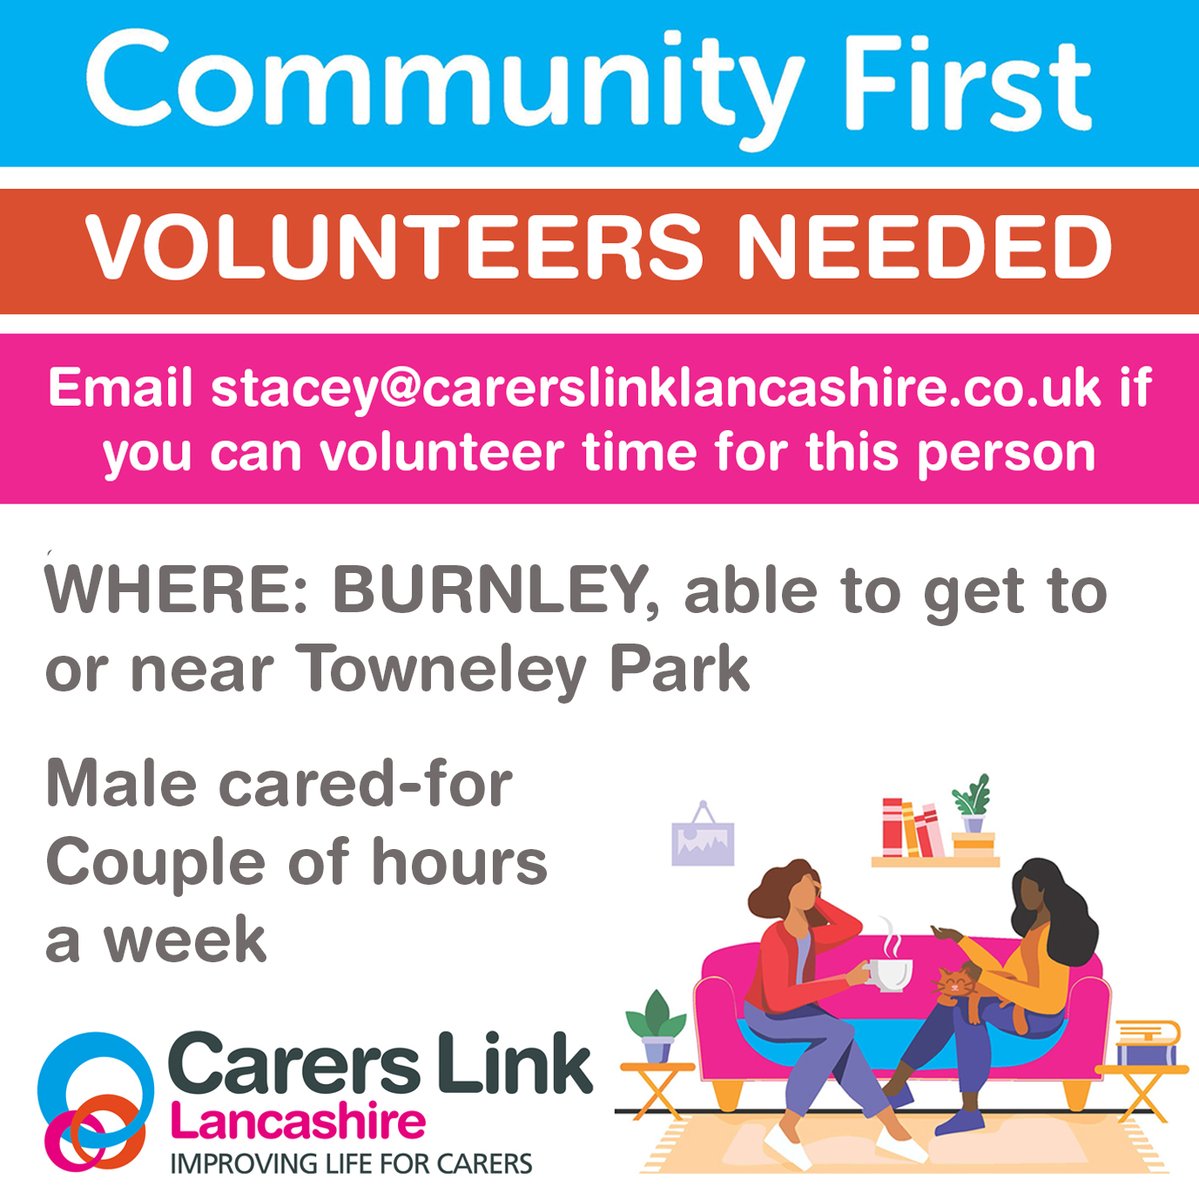 Could you volunteer just a couple of hours a week to spend some down time watching tv or playing games with a cared-for and allow their carer a short break to do things like personal appointments, errands, or just time for a relaxing walk? Email stacey@carerslinklancashire.co.uk